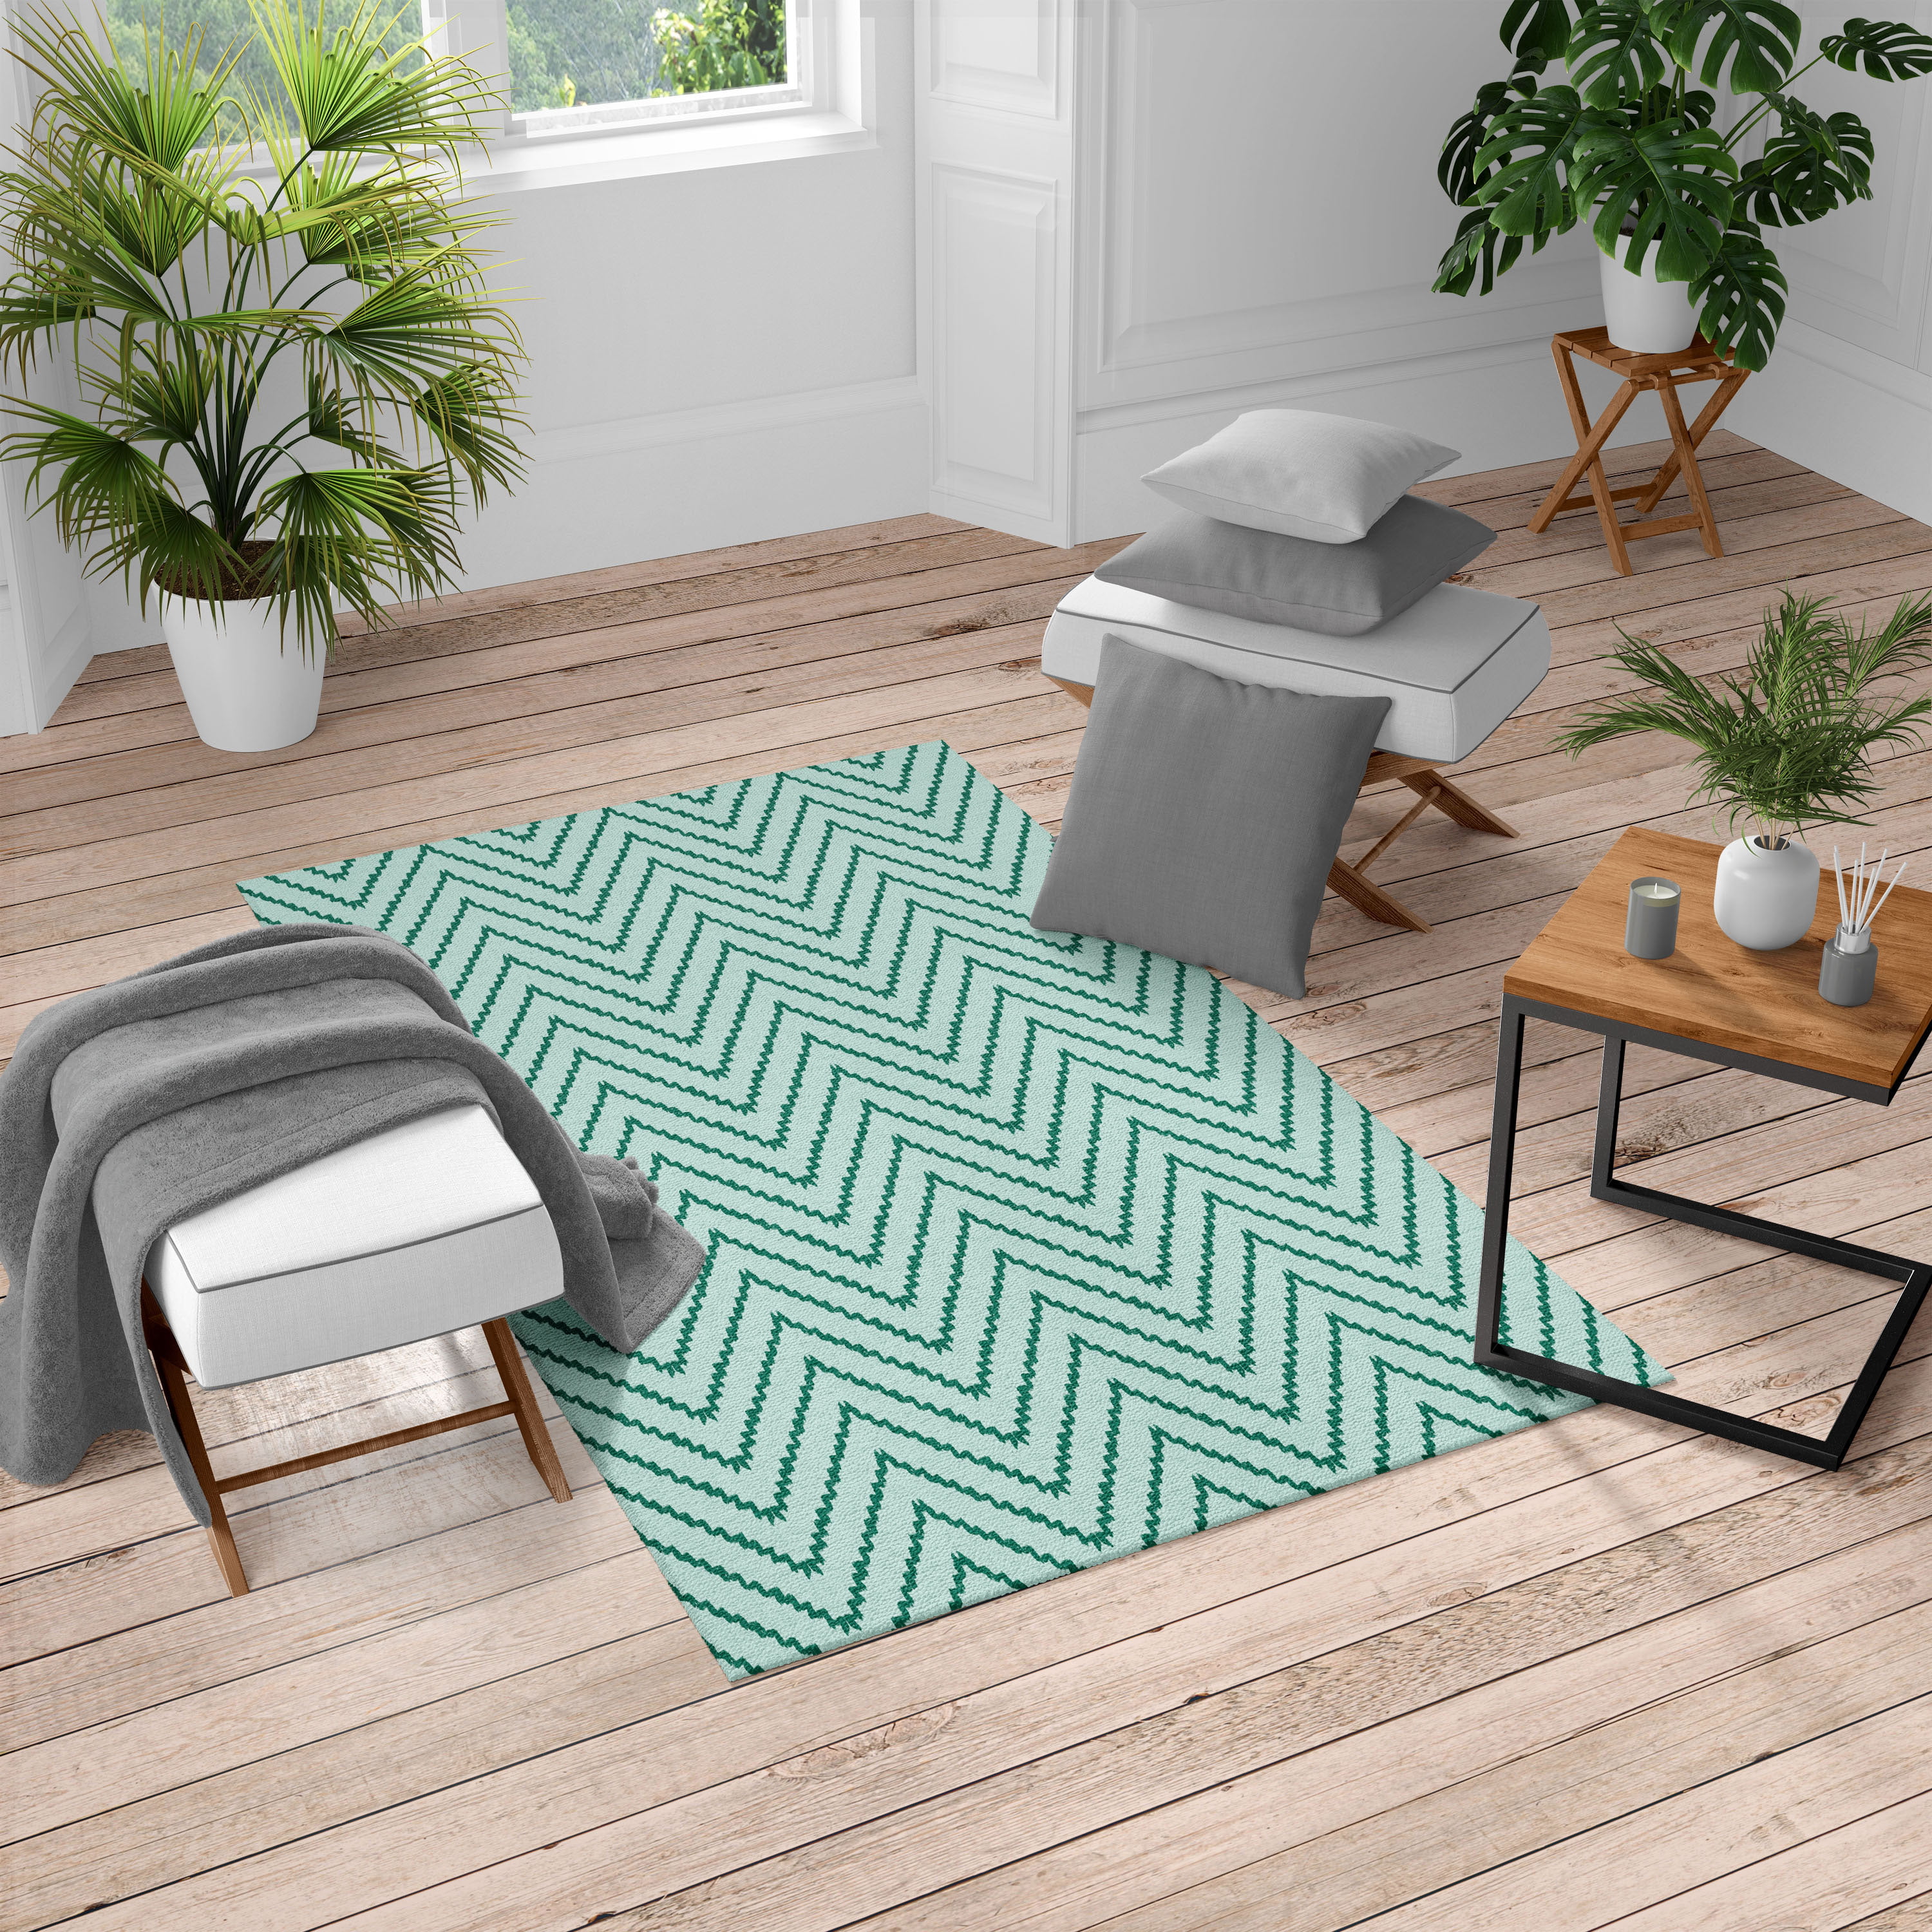 Modern Geometric Rugs Small Large Rugs For Living Room Long ZigZag Hall Runners 